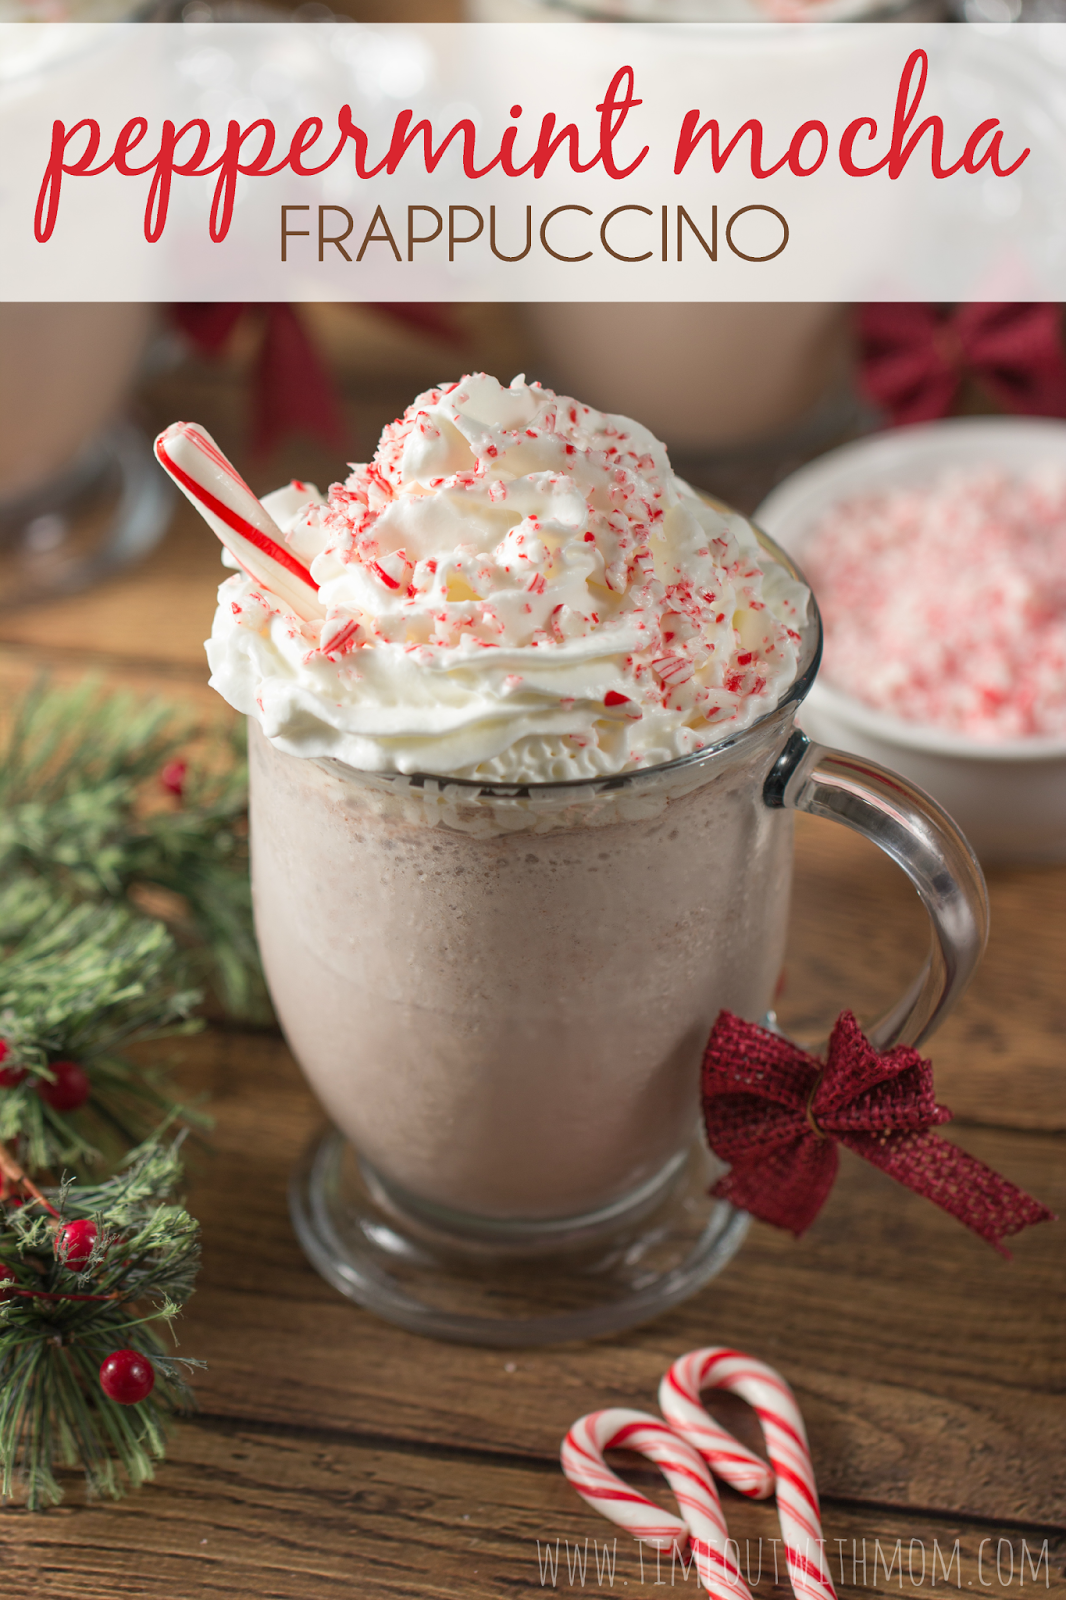 Starbucks Peppermint Mocha Frappucino flavor is back for the holidays